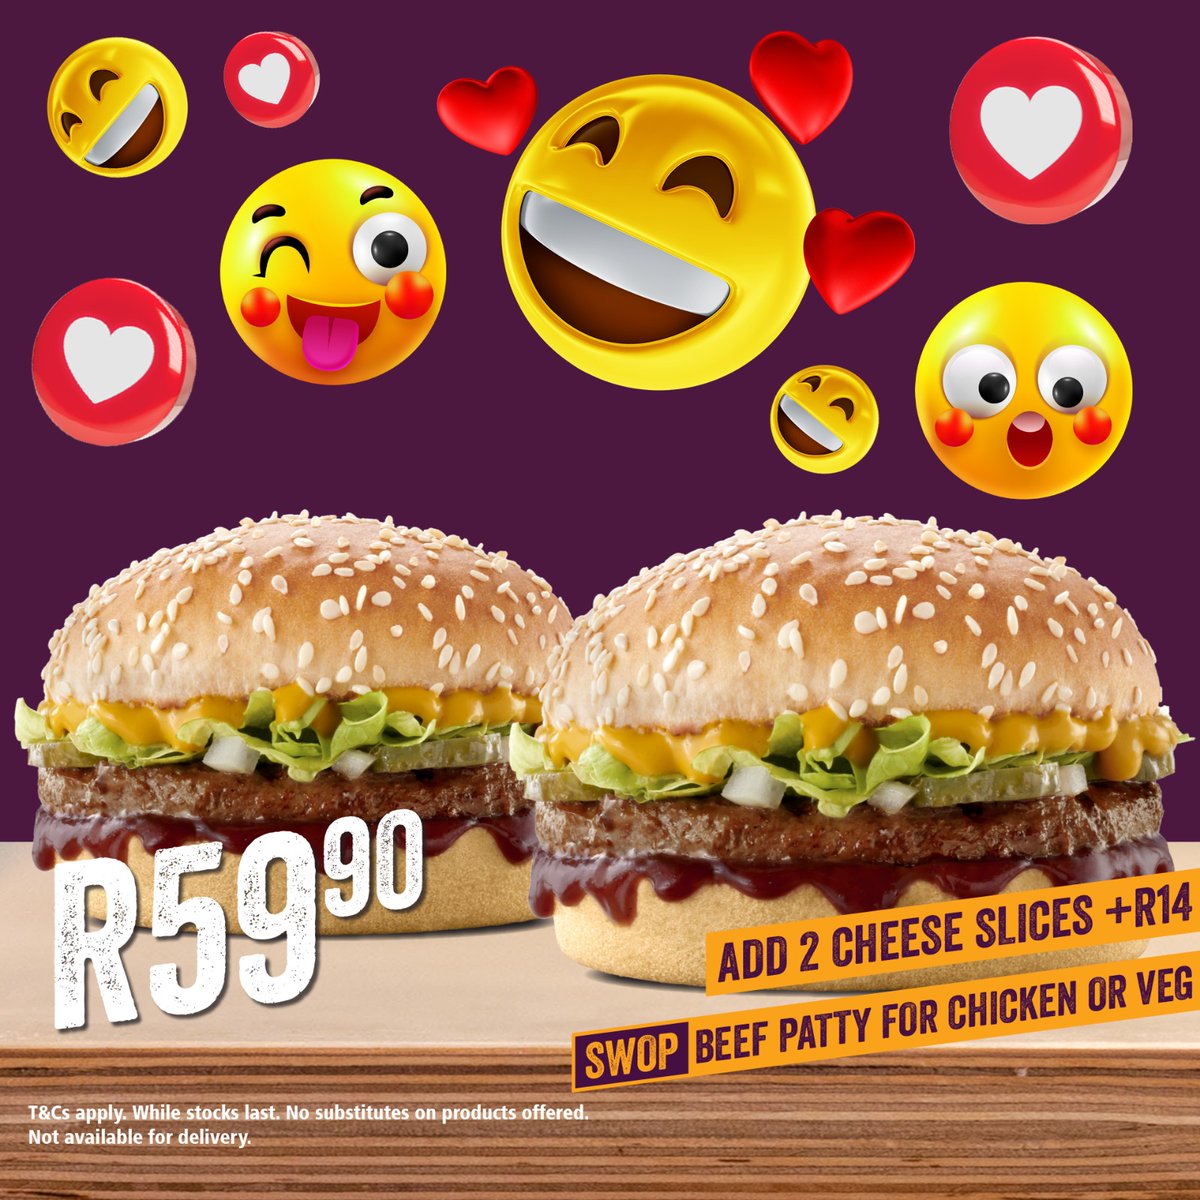 Use an emoji to describe how you feel when someone offers to share one of their #WackyWednesday 🔥 -grilled burgers with you! 💜 👉🏾 : steers.co.za